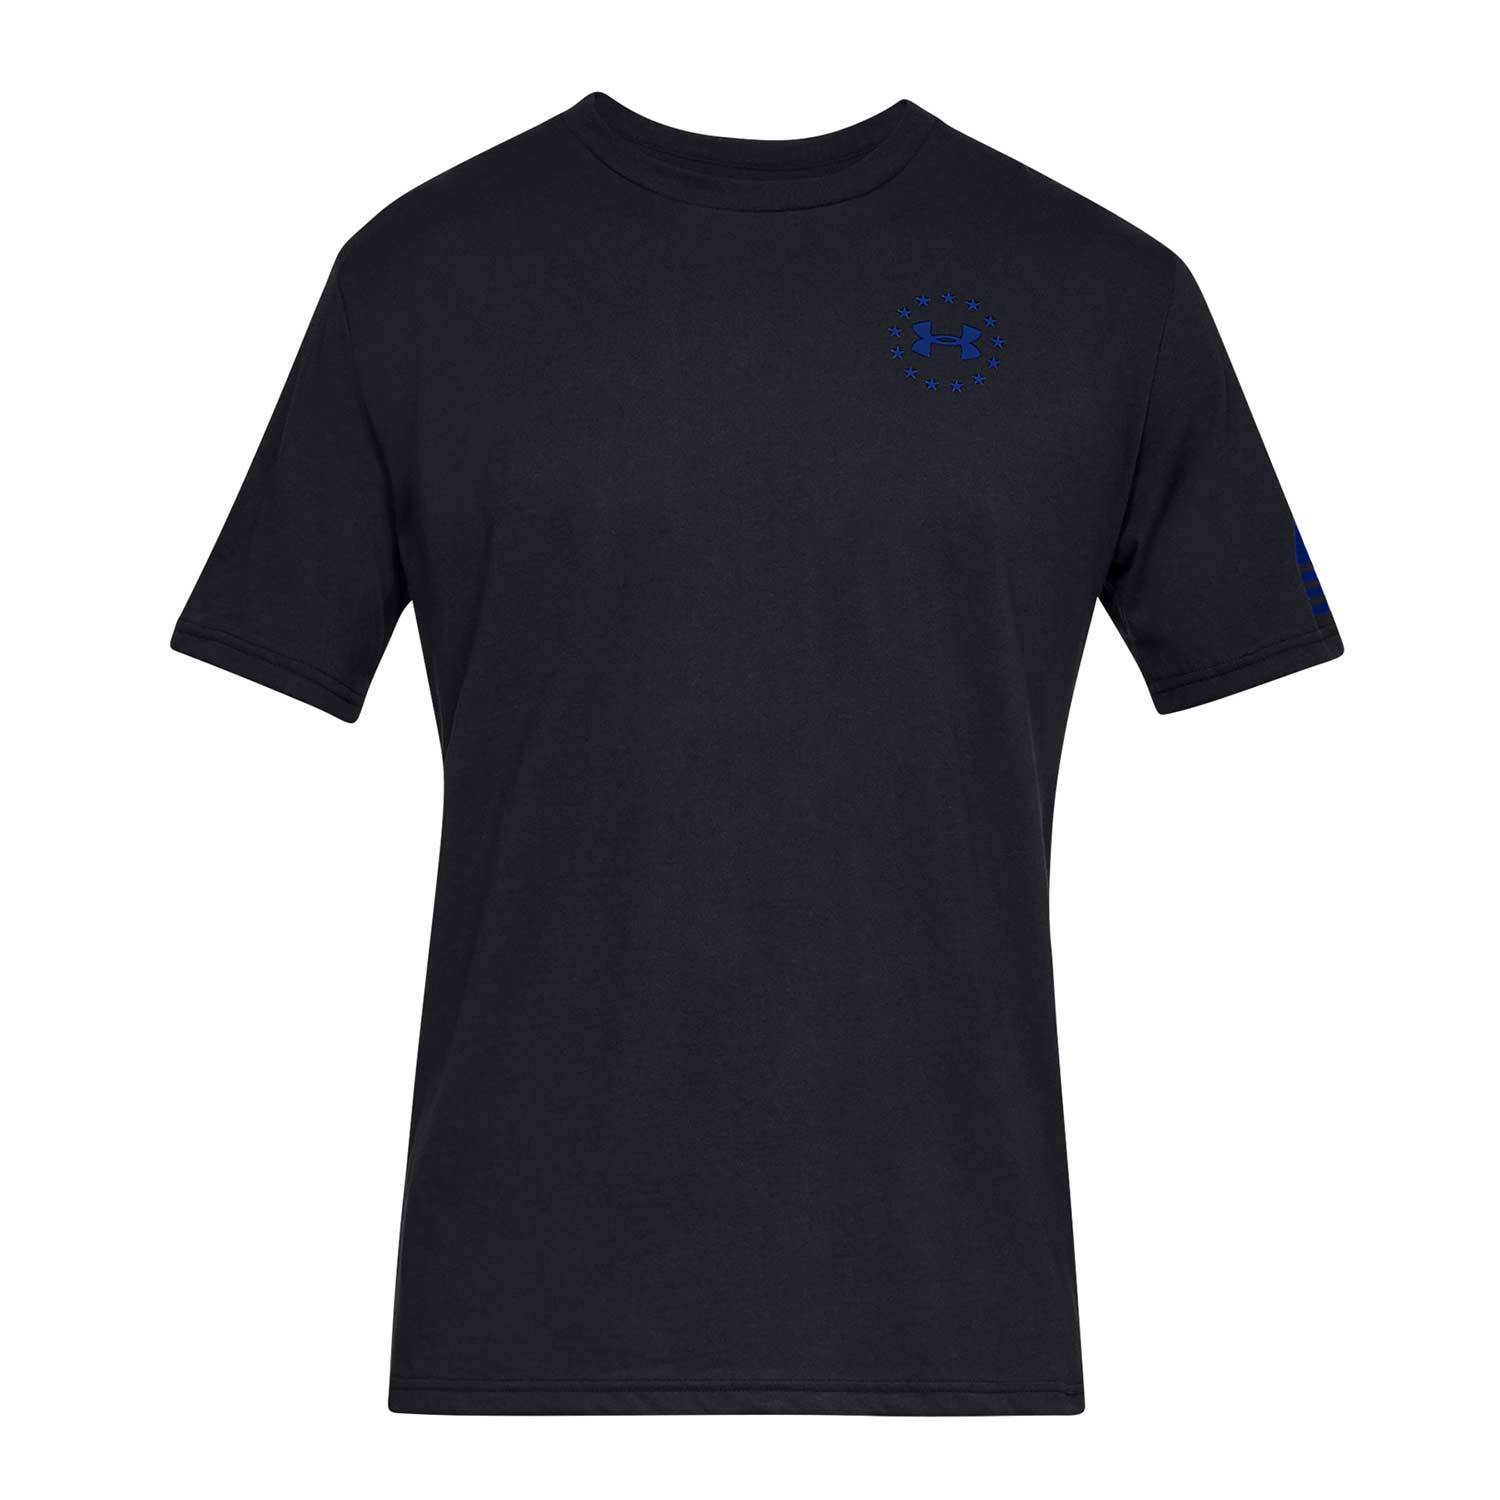 UNDER ARMOUR FREEDOM EXPRESS T-SHIRT